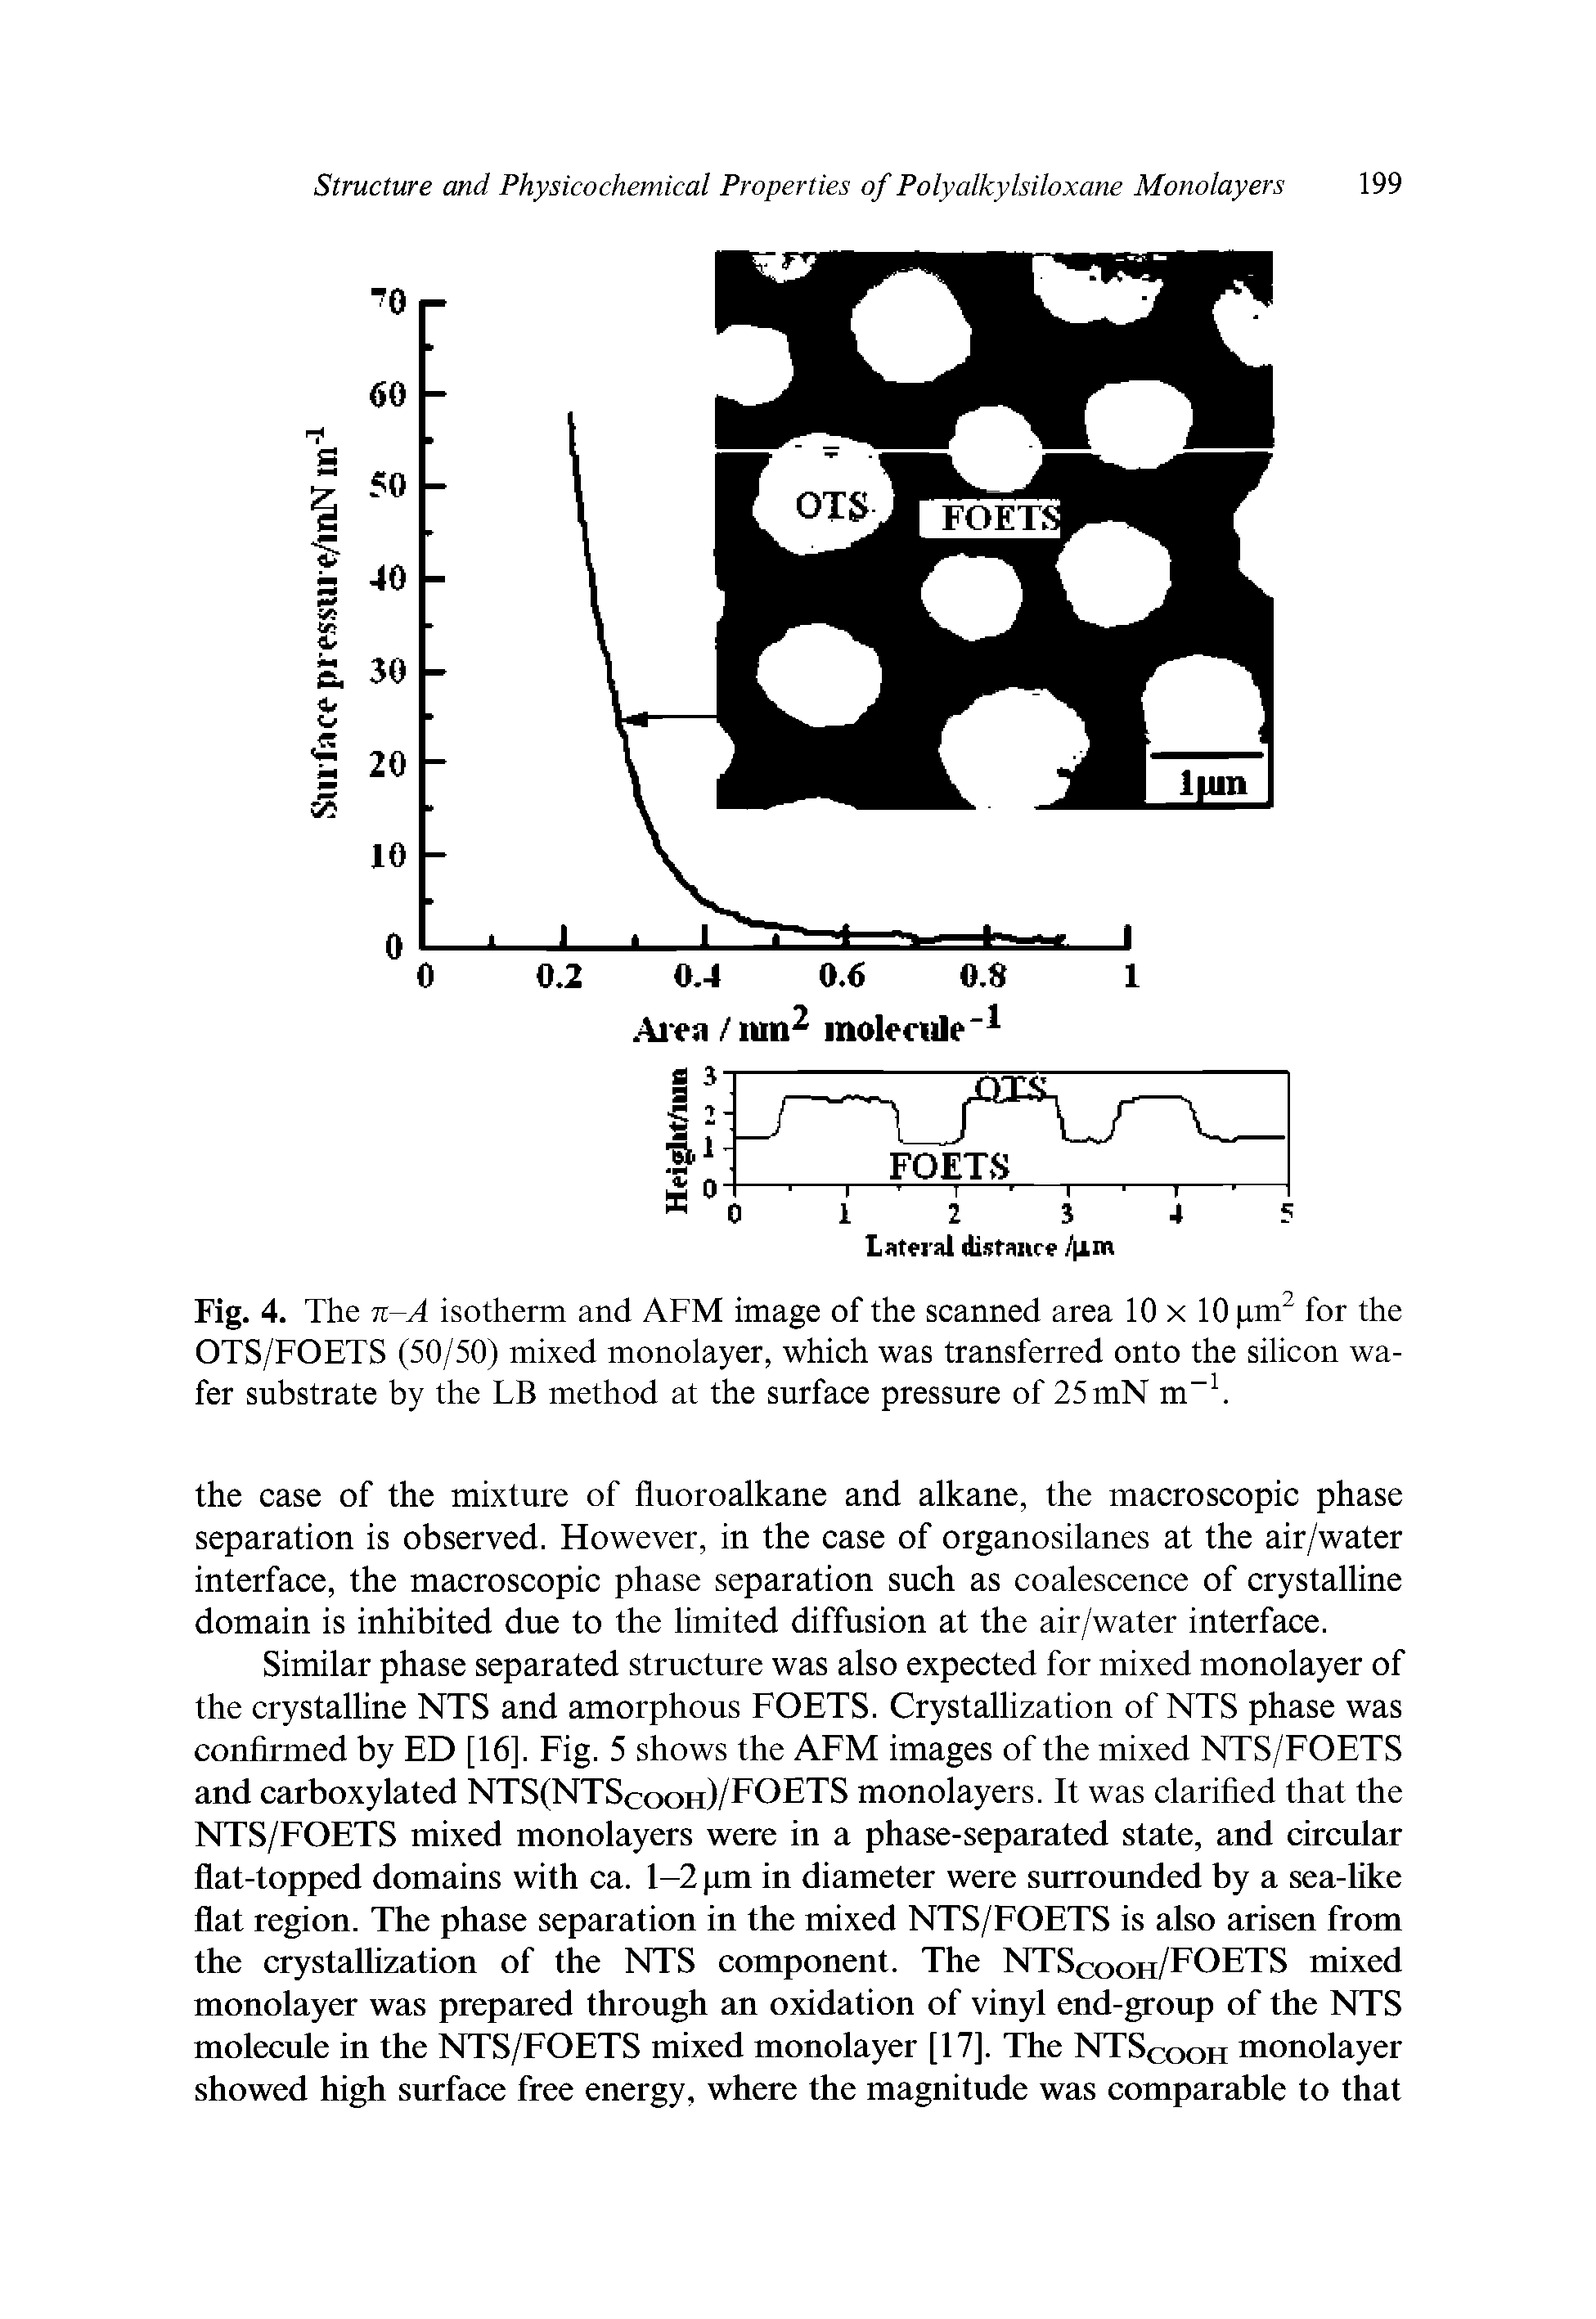 Fig. 4. The n-A isotherm and AFM image of the scanned area 10x10 pm2 for the OTS/FOETS (50/50) mixed monolayer, which was transferred onto the silicon wafer substrate by the LB method at the surface pressure of 25 mN m-1.